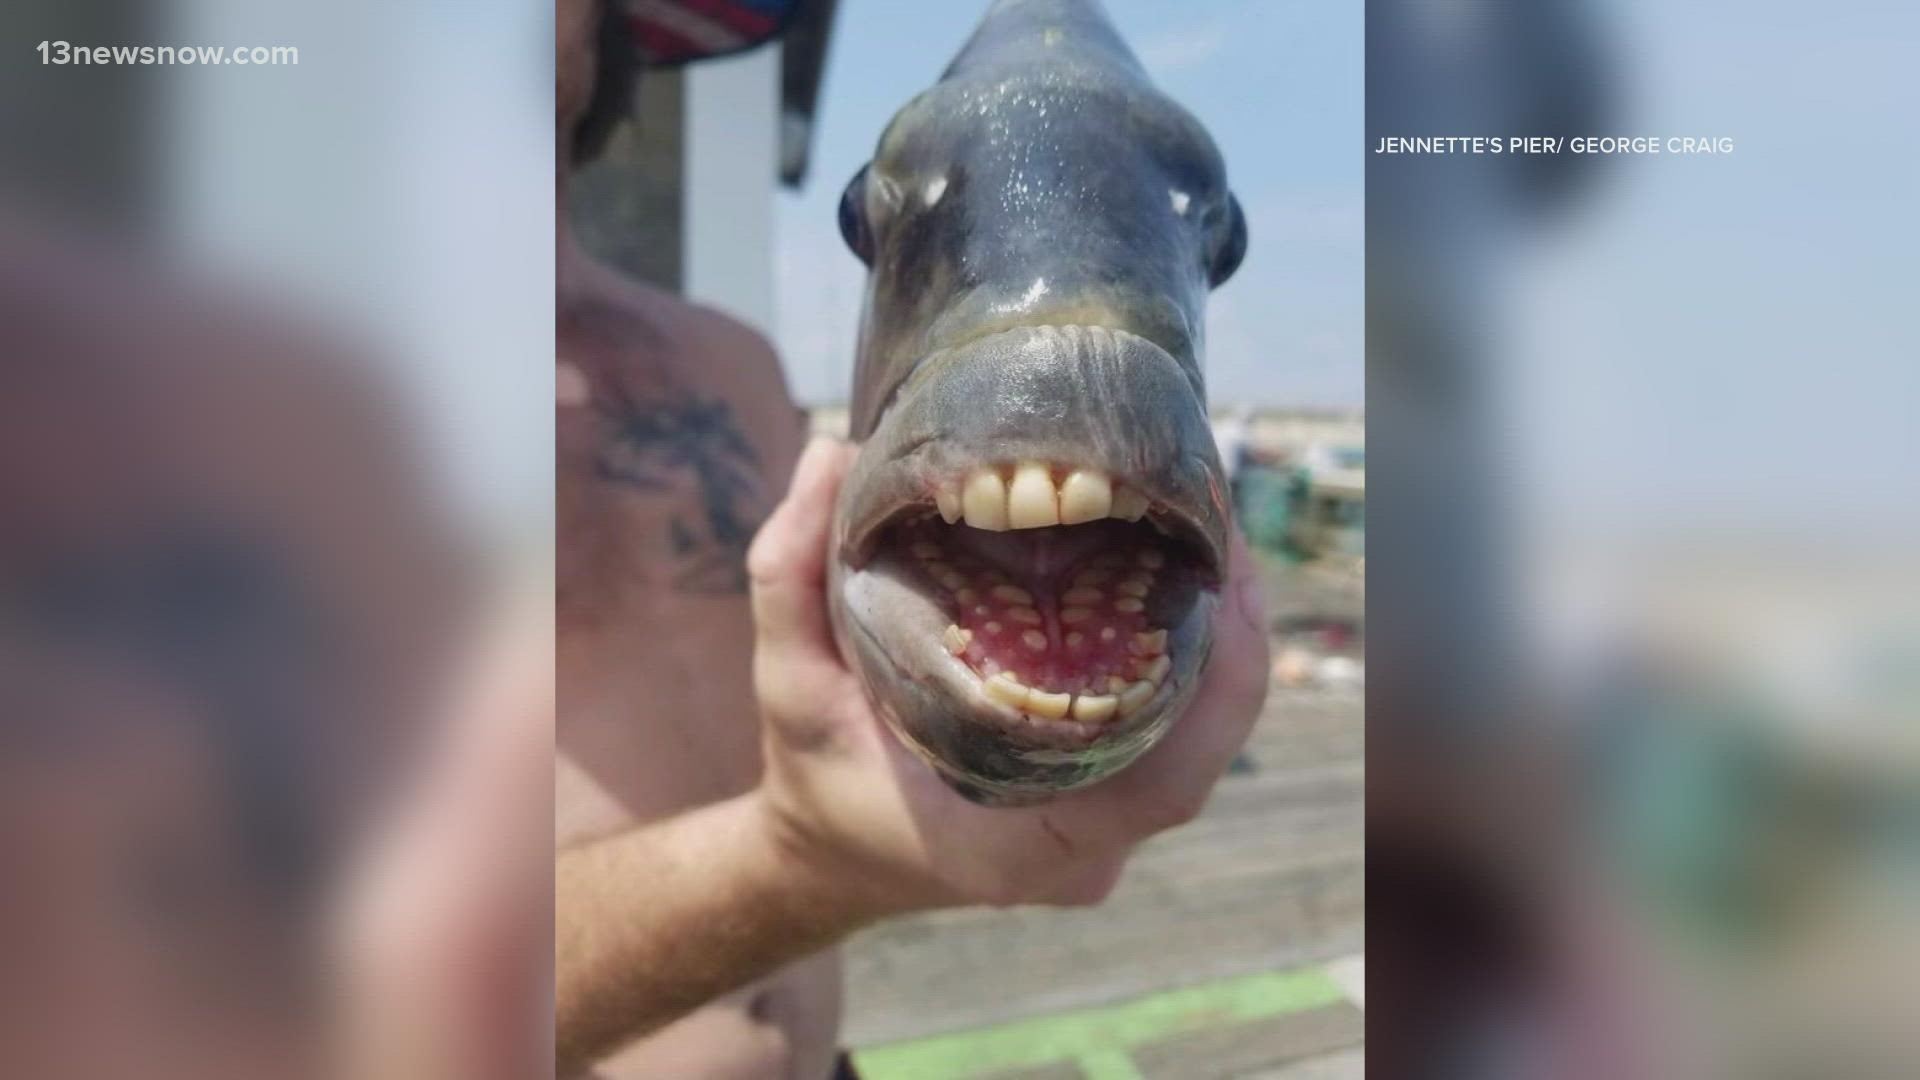 A fish with multiple rows of human-like teeth was caught in Nags Head earlier in the week, lighting up social media and no doubt haunting the dreams of many who gaze